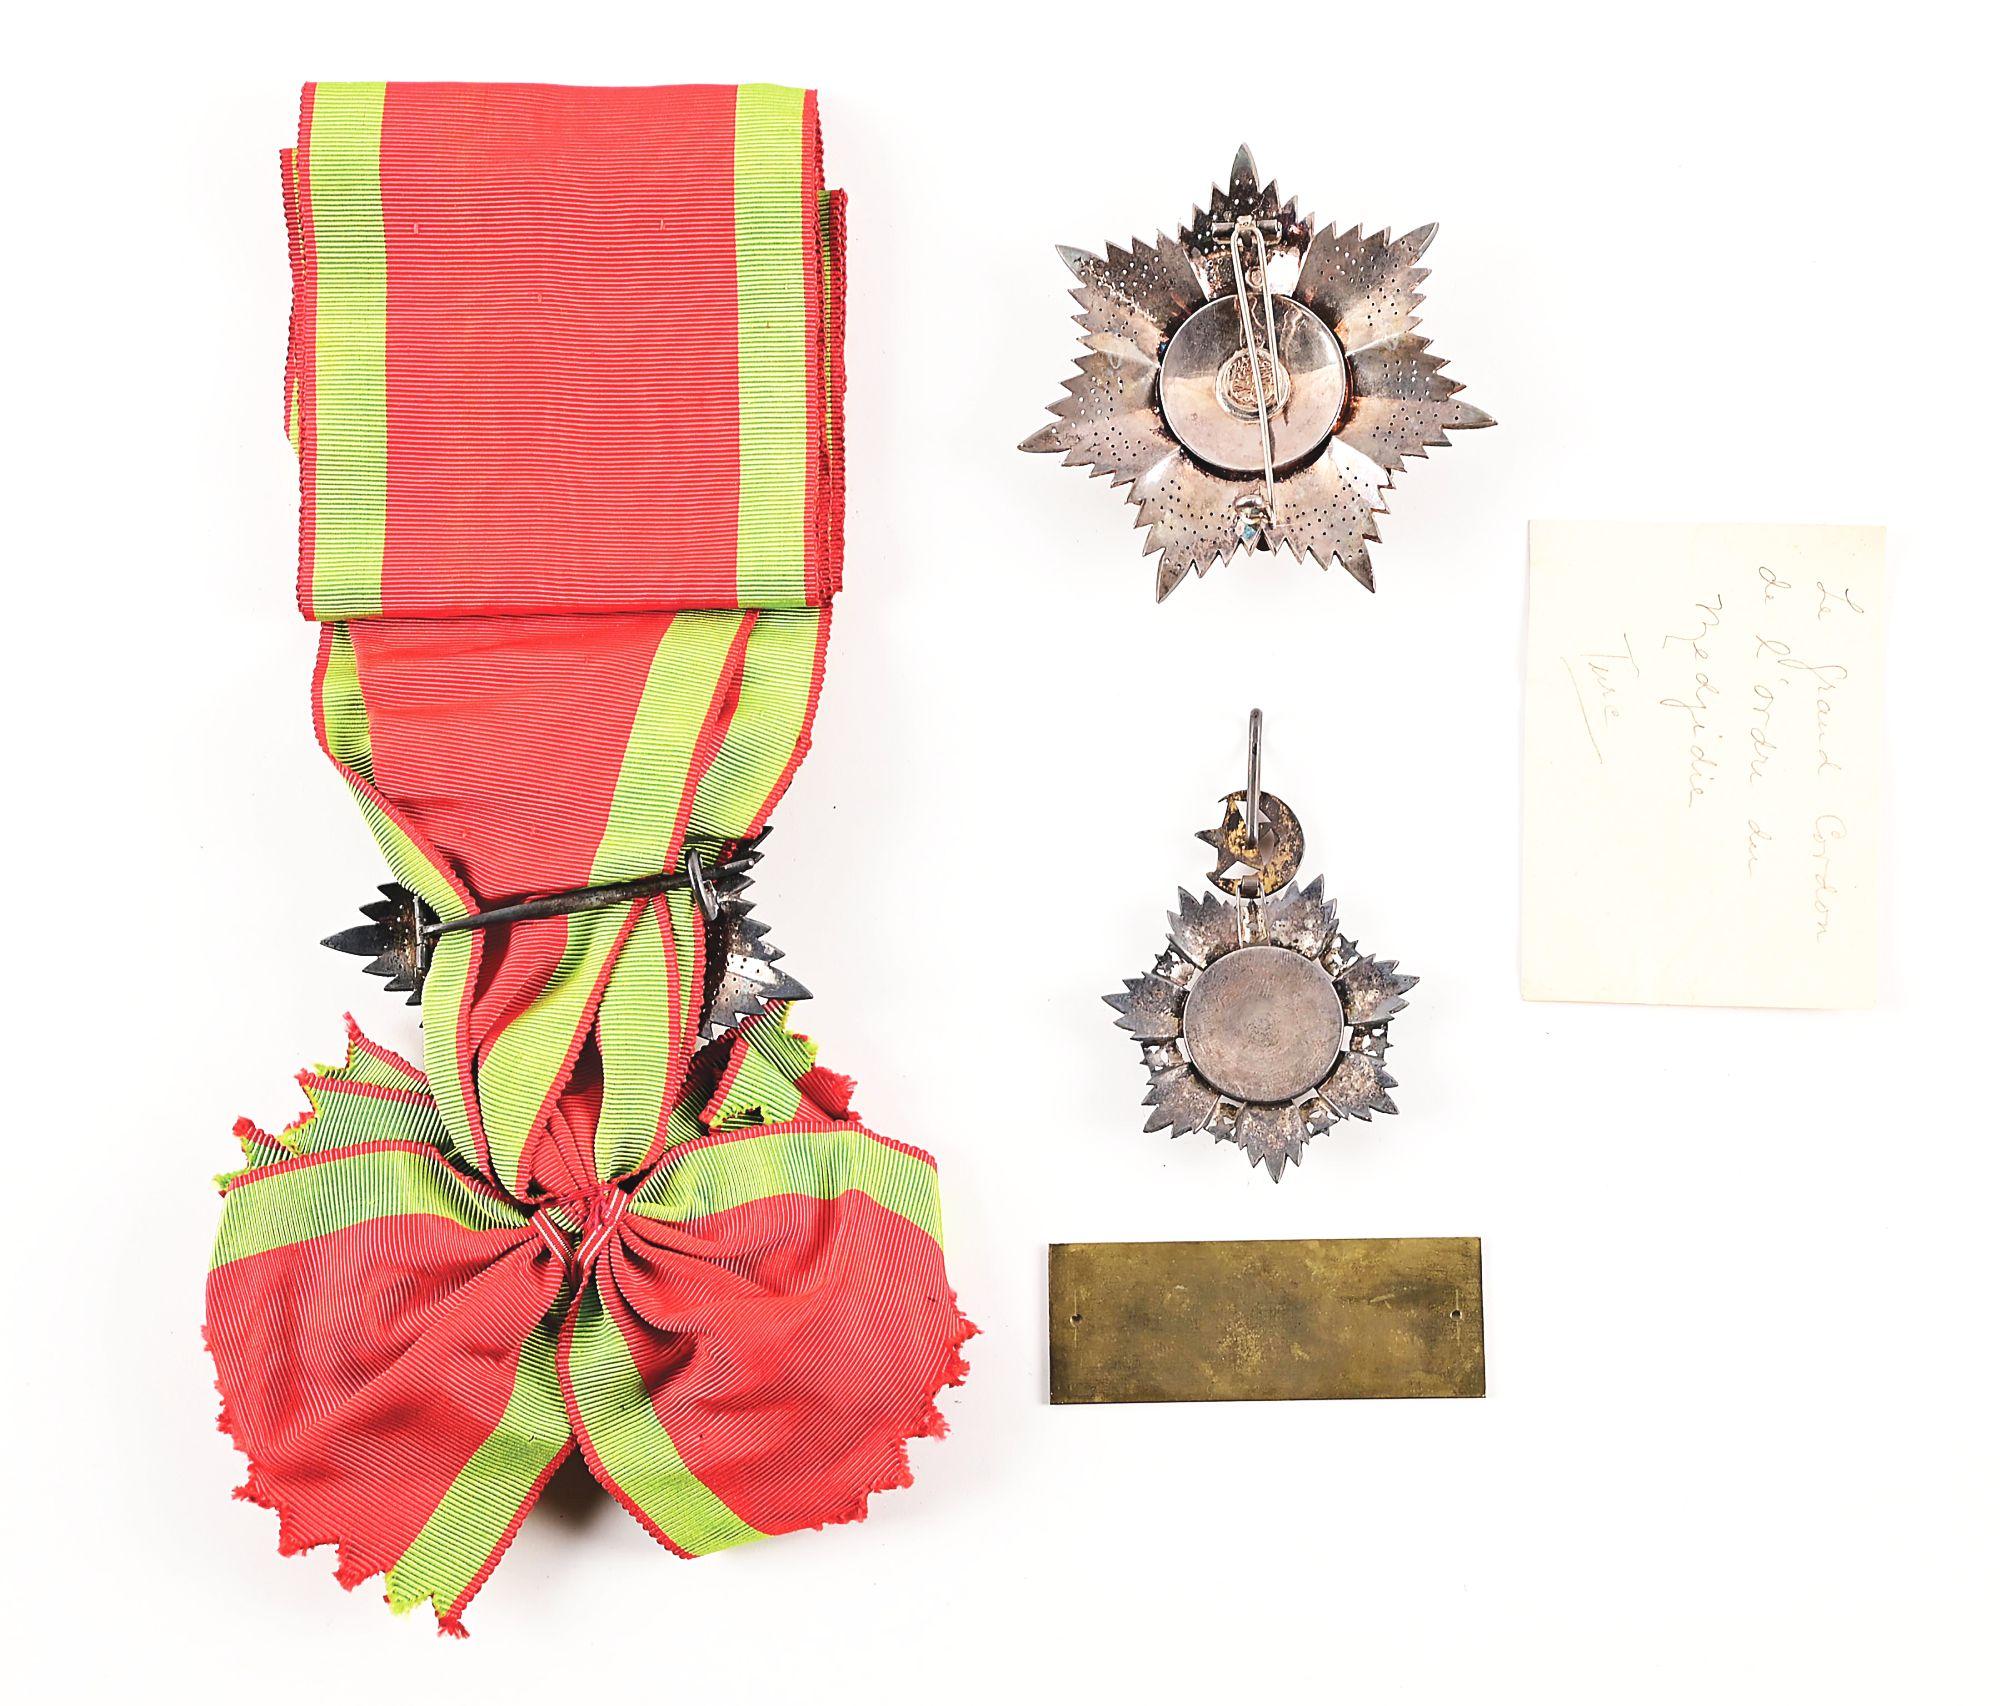 OTTOMAN EMPIRE ORDER OF THE MEDJIDIE AWARDS ATTRIBUTED TO PRINCE AYMON DE FAUCIGNY.